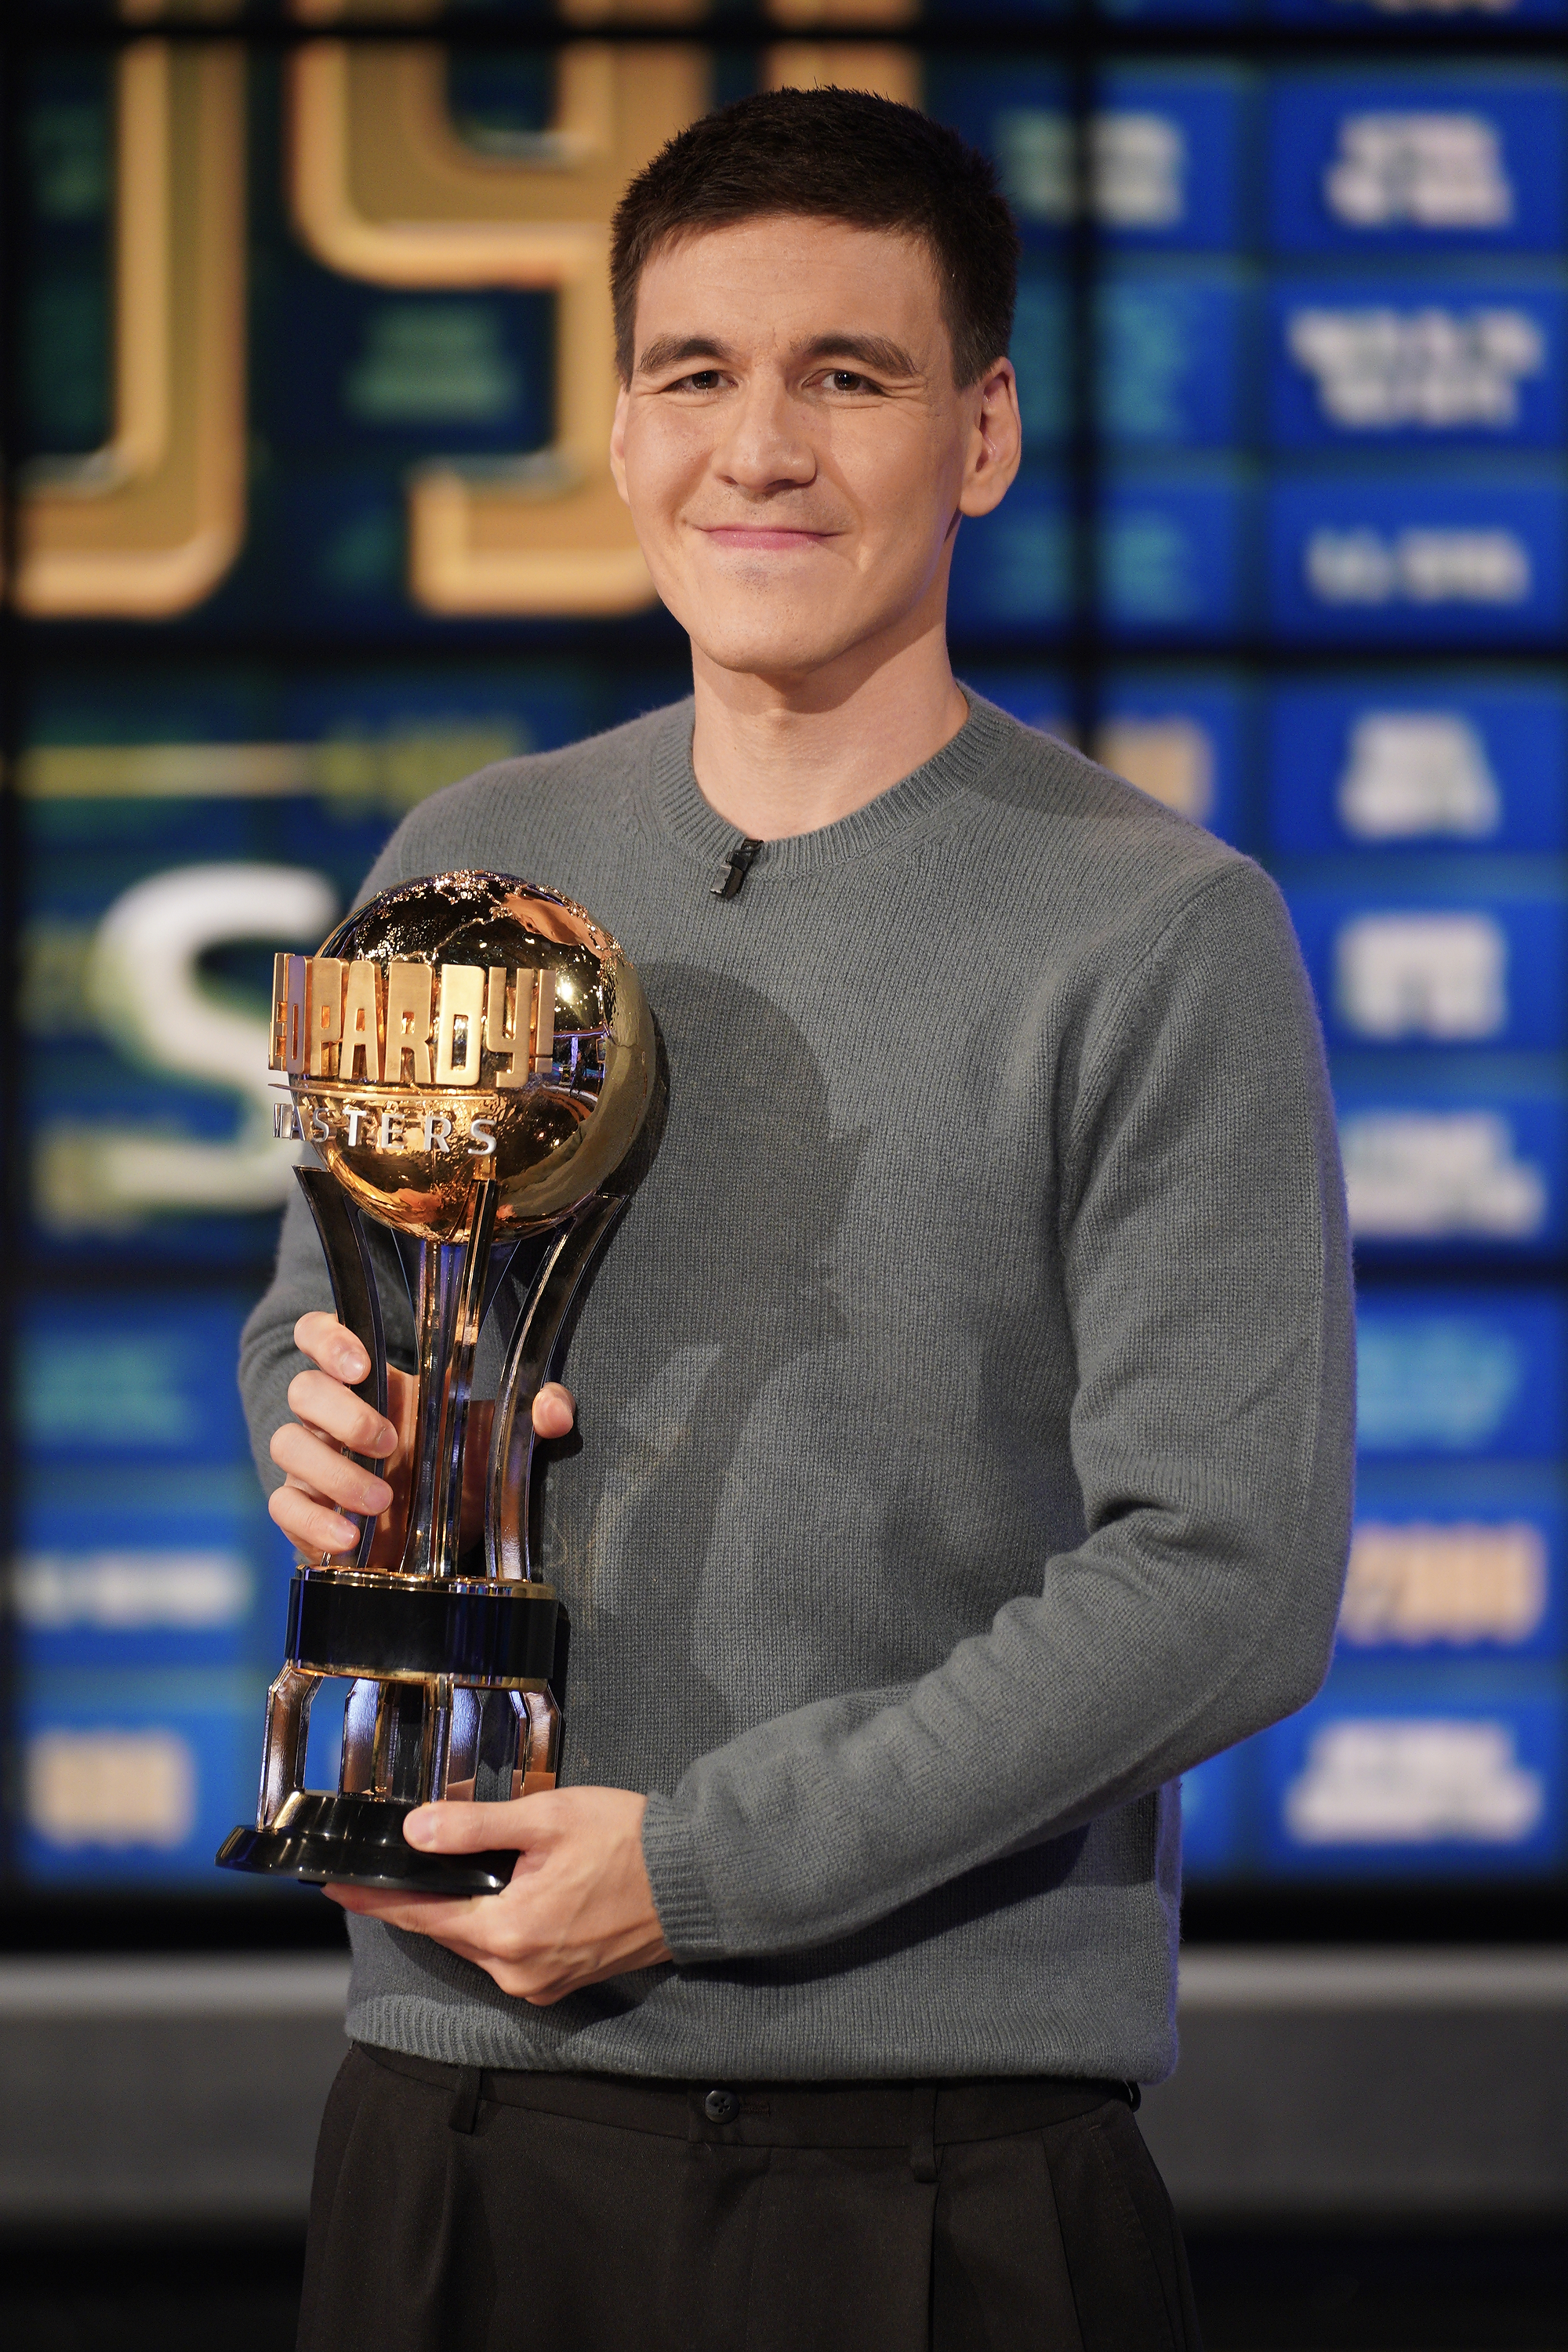 It's time to see if anyone can snatch the trophy - and $500,000 - from Holzhauer